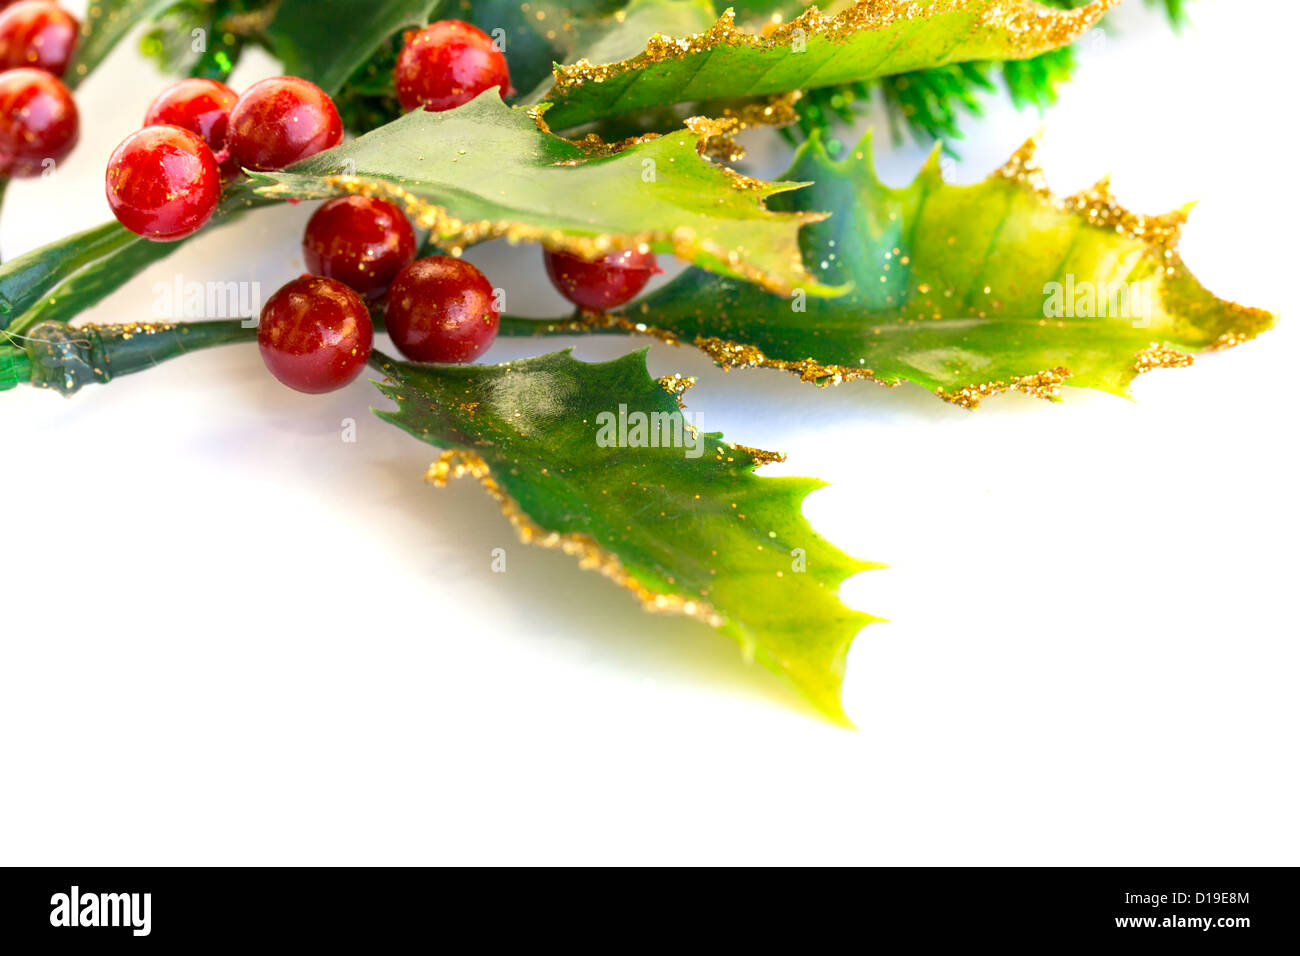 Holly berry plant with red berries on white background, Christmas decoration. Stock Photo